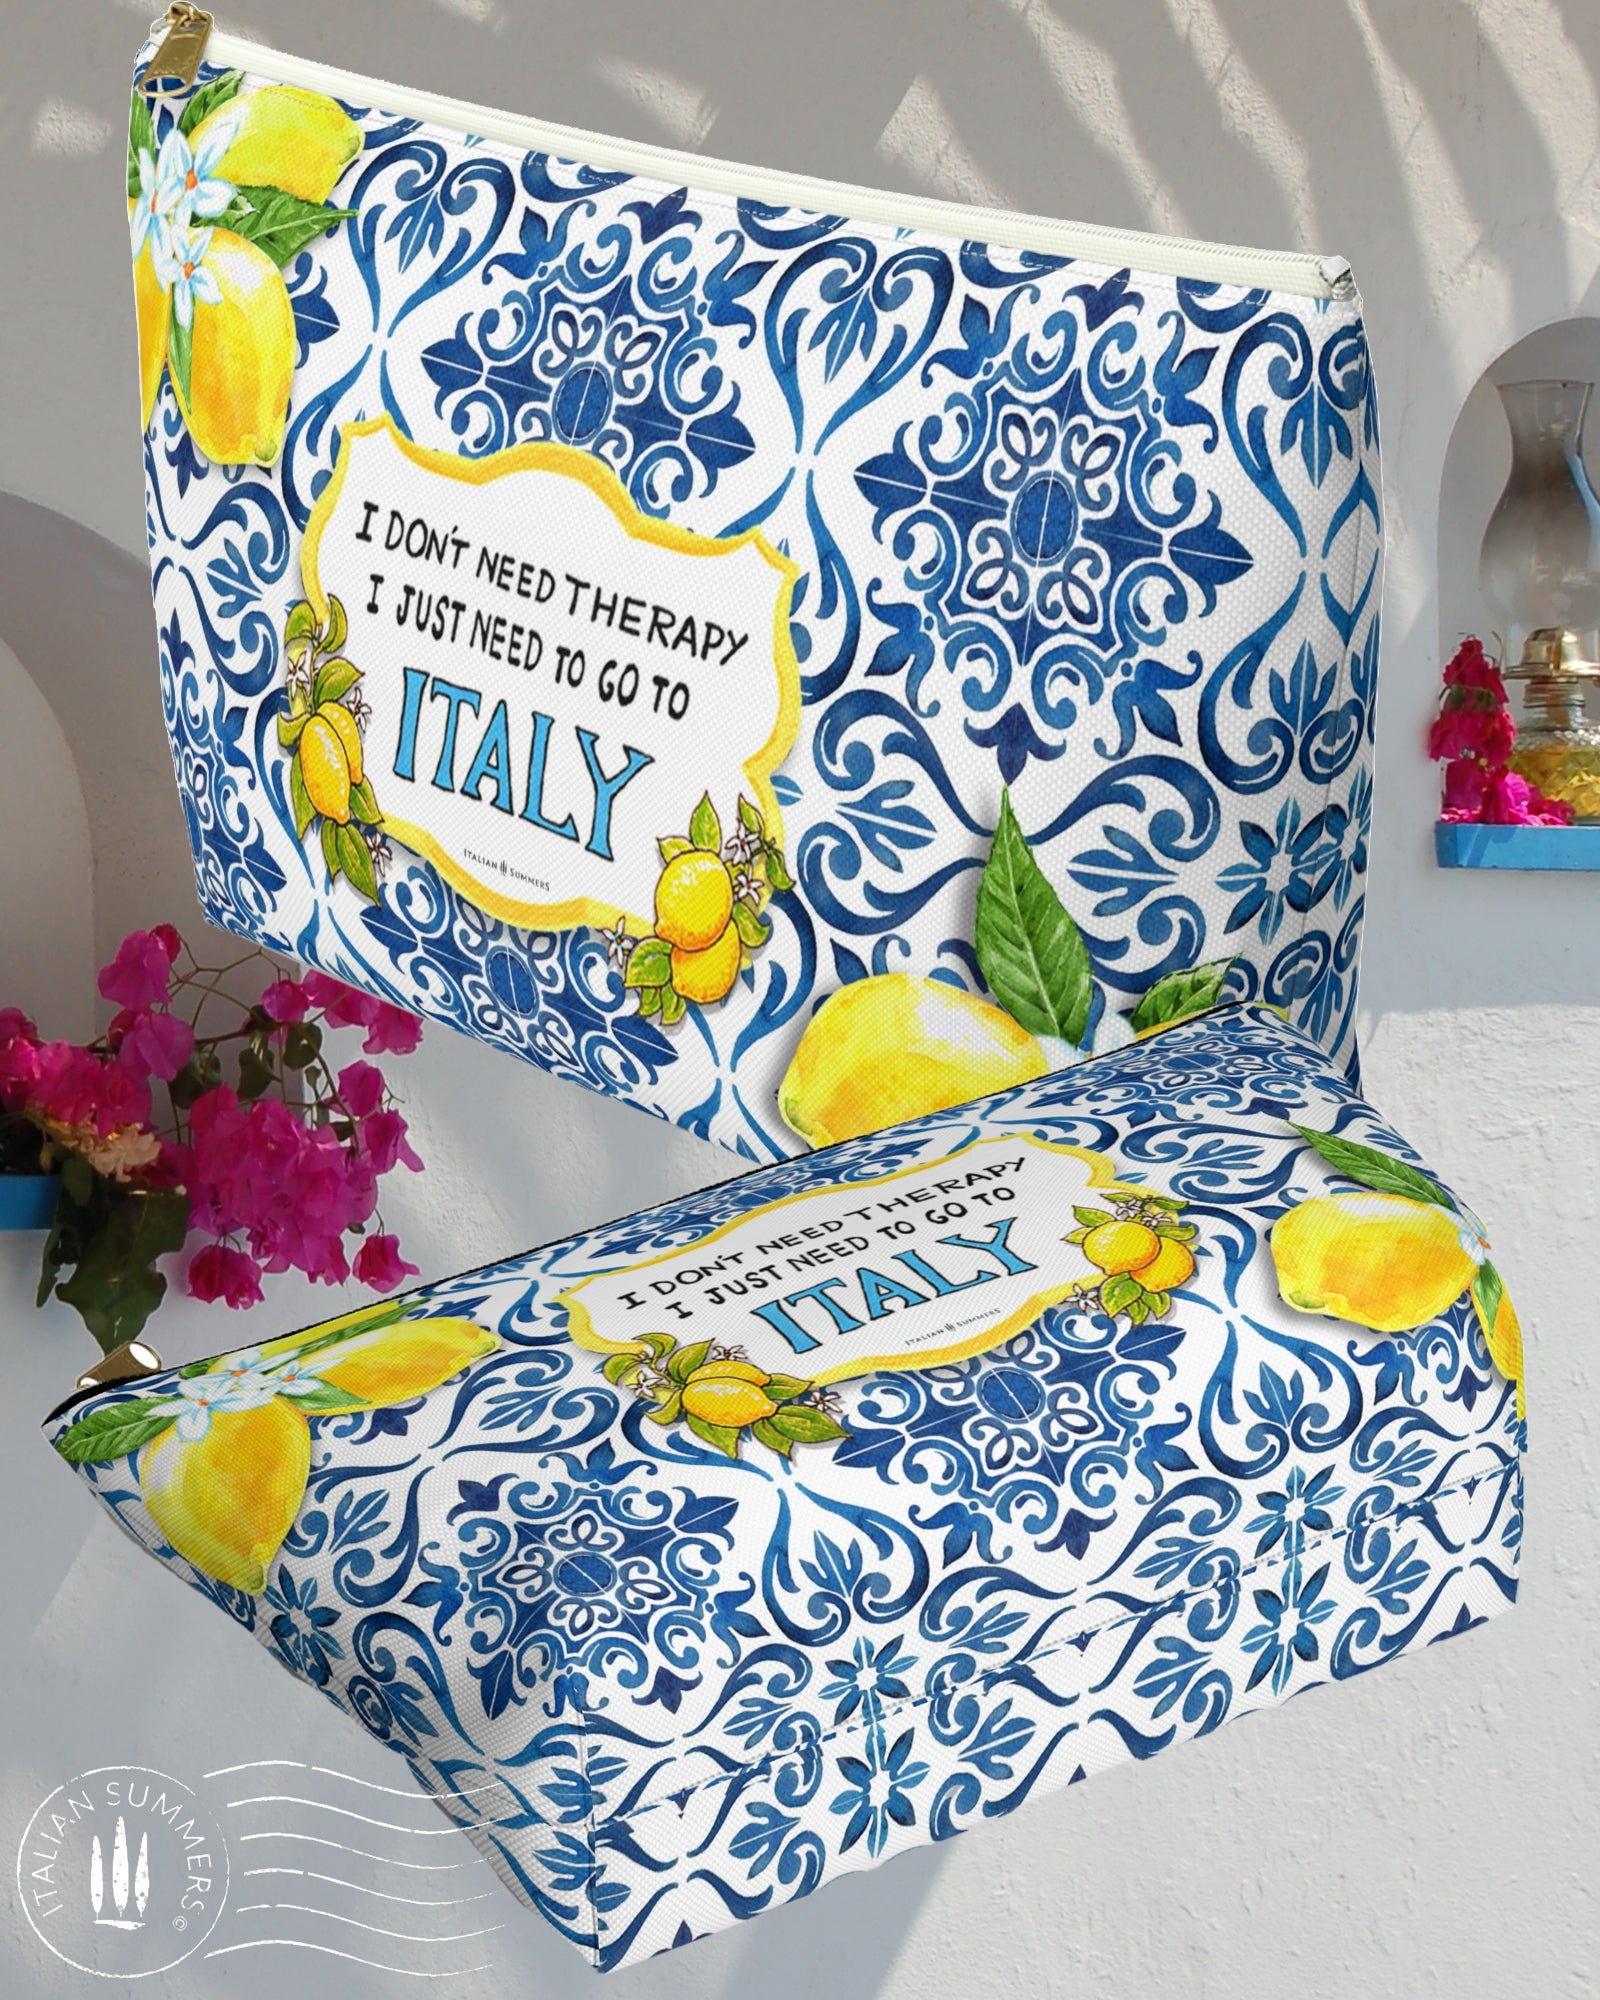 Italy inspired vibrant clutch representing bright blue Italian maiolica tiles and Amalfi Coast lemons and the quote "I don't need therapy, I just need to go to Italy"Made by Italian Summers